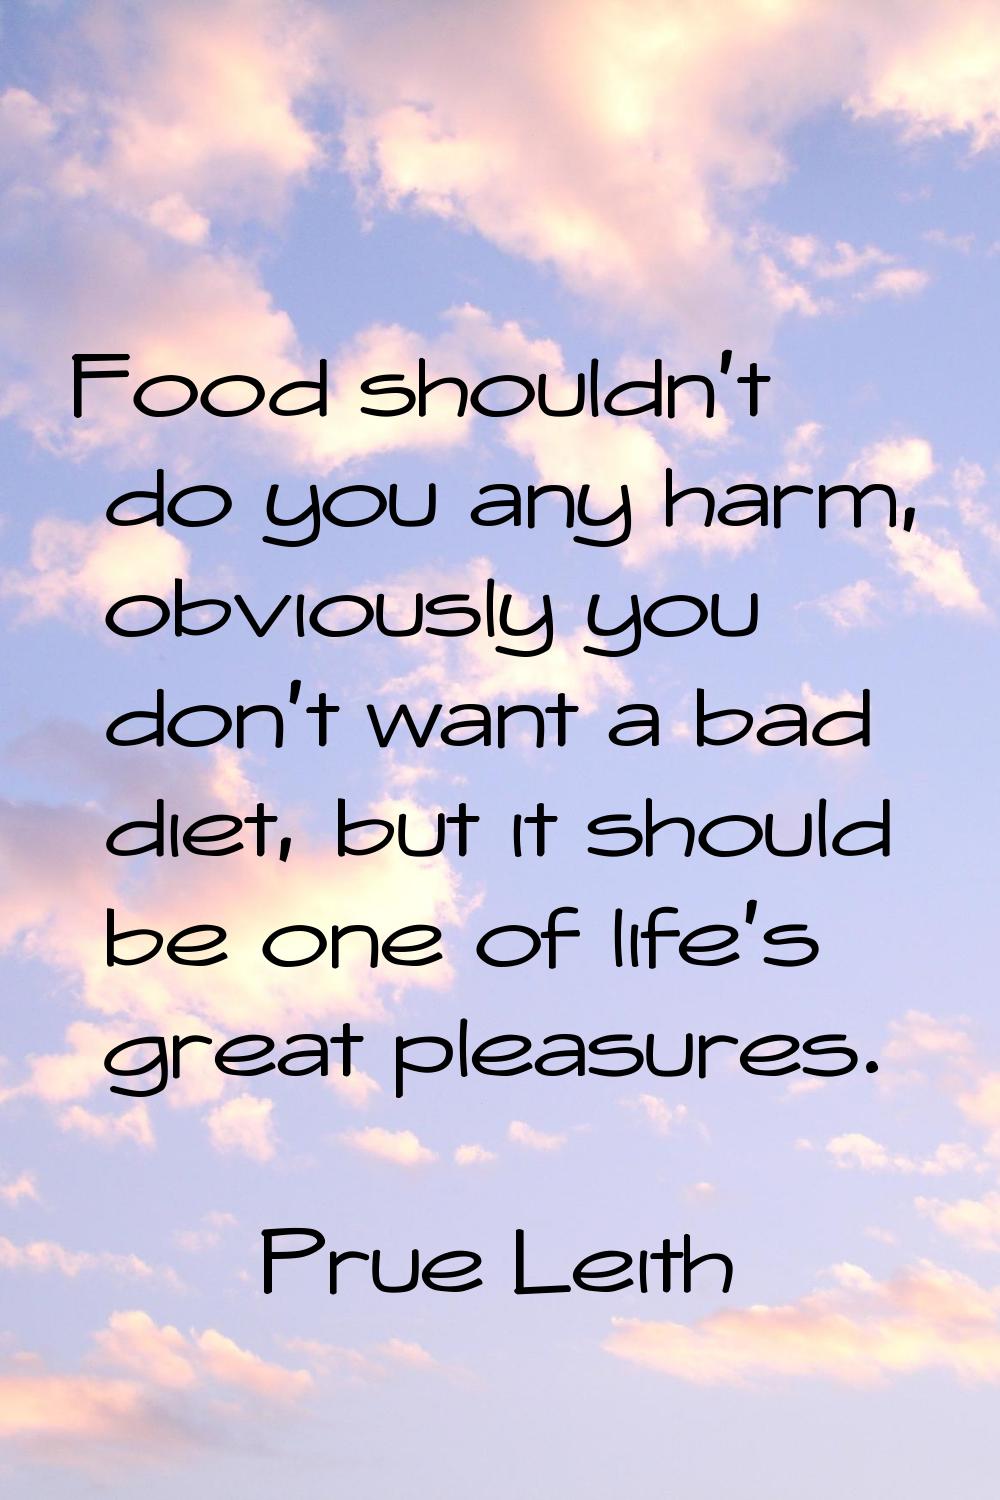 Food shouldn't do you any harm, obviously you don't want a bad diet, but it should be one of life's